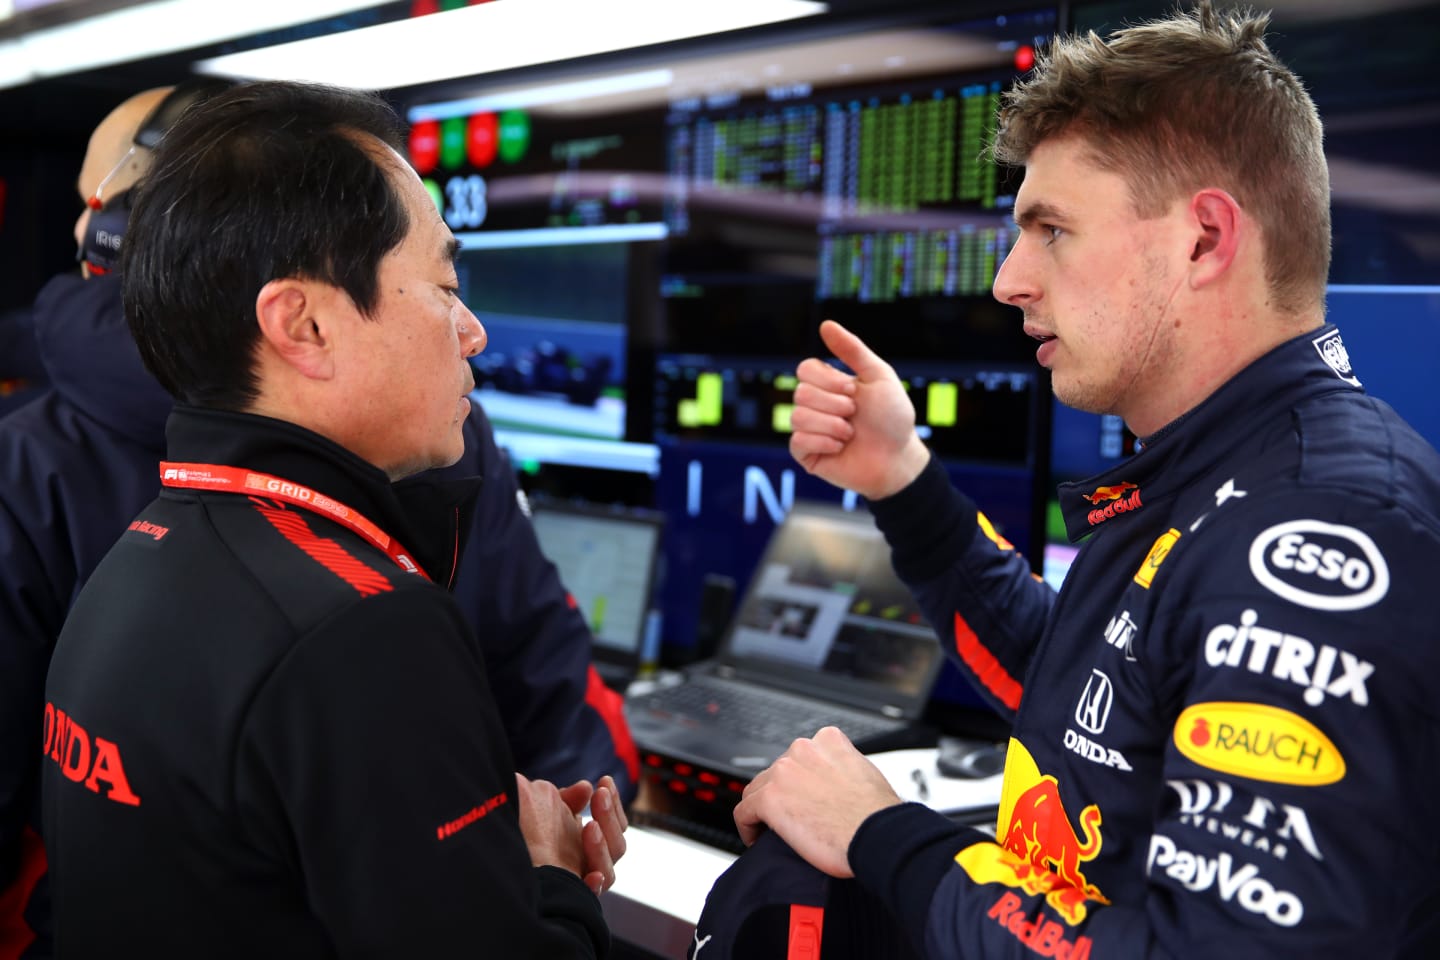 BARCELONA, SPAIN - FEBRUARY 19: Max Verstappen of Netherlands and Red Bull Racing talks with